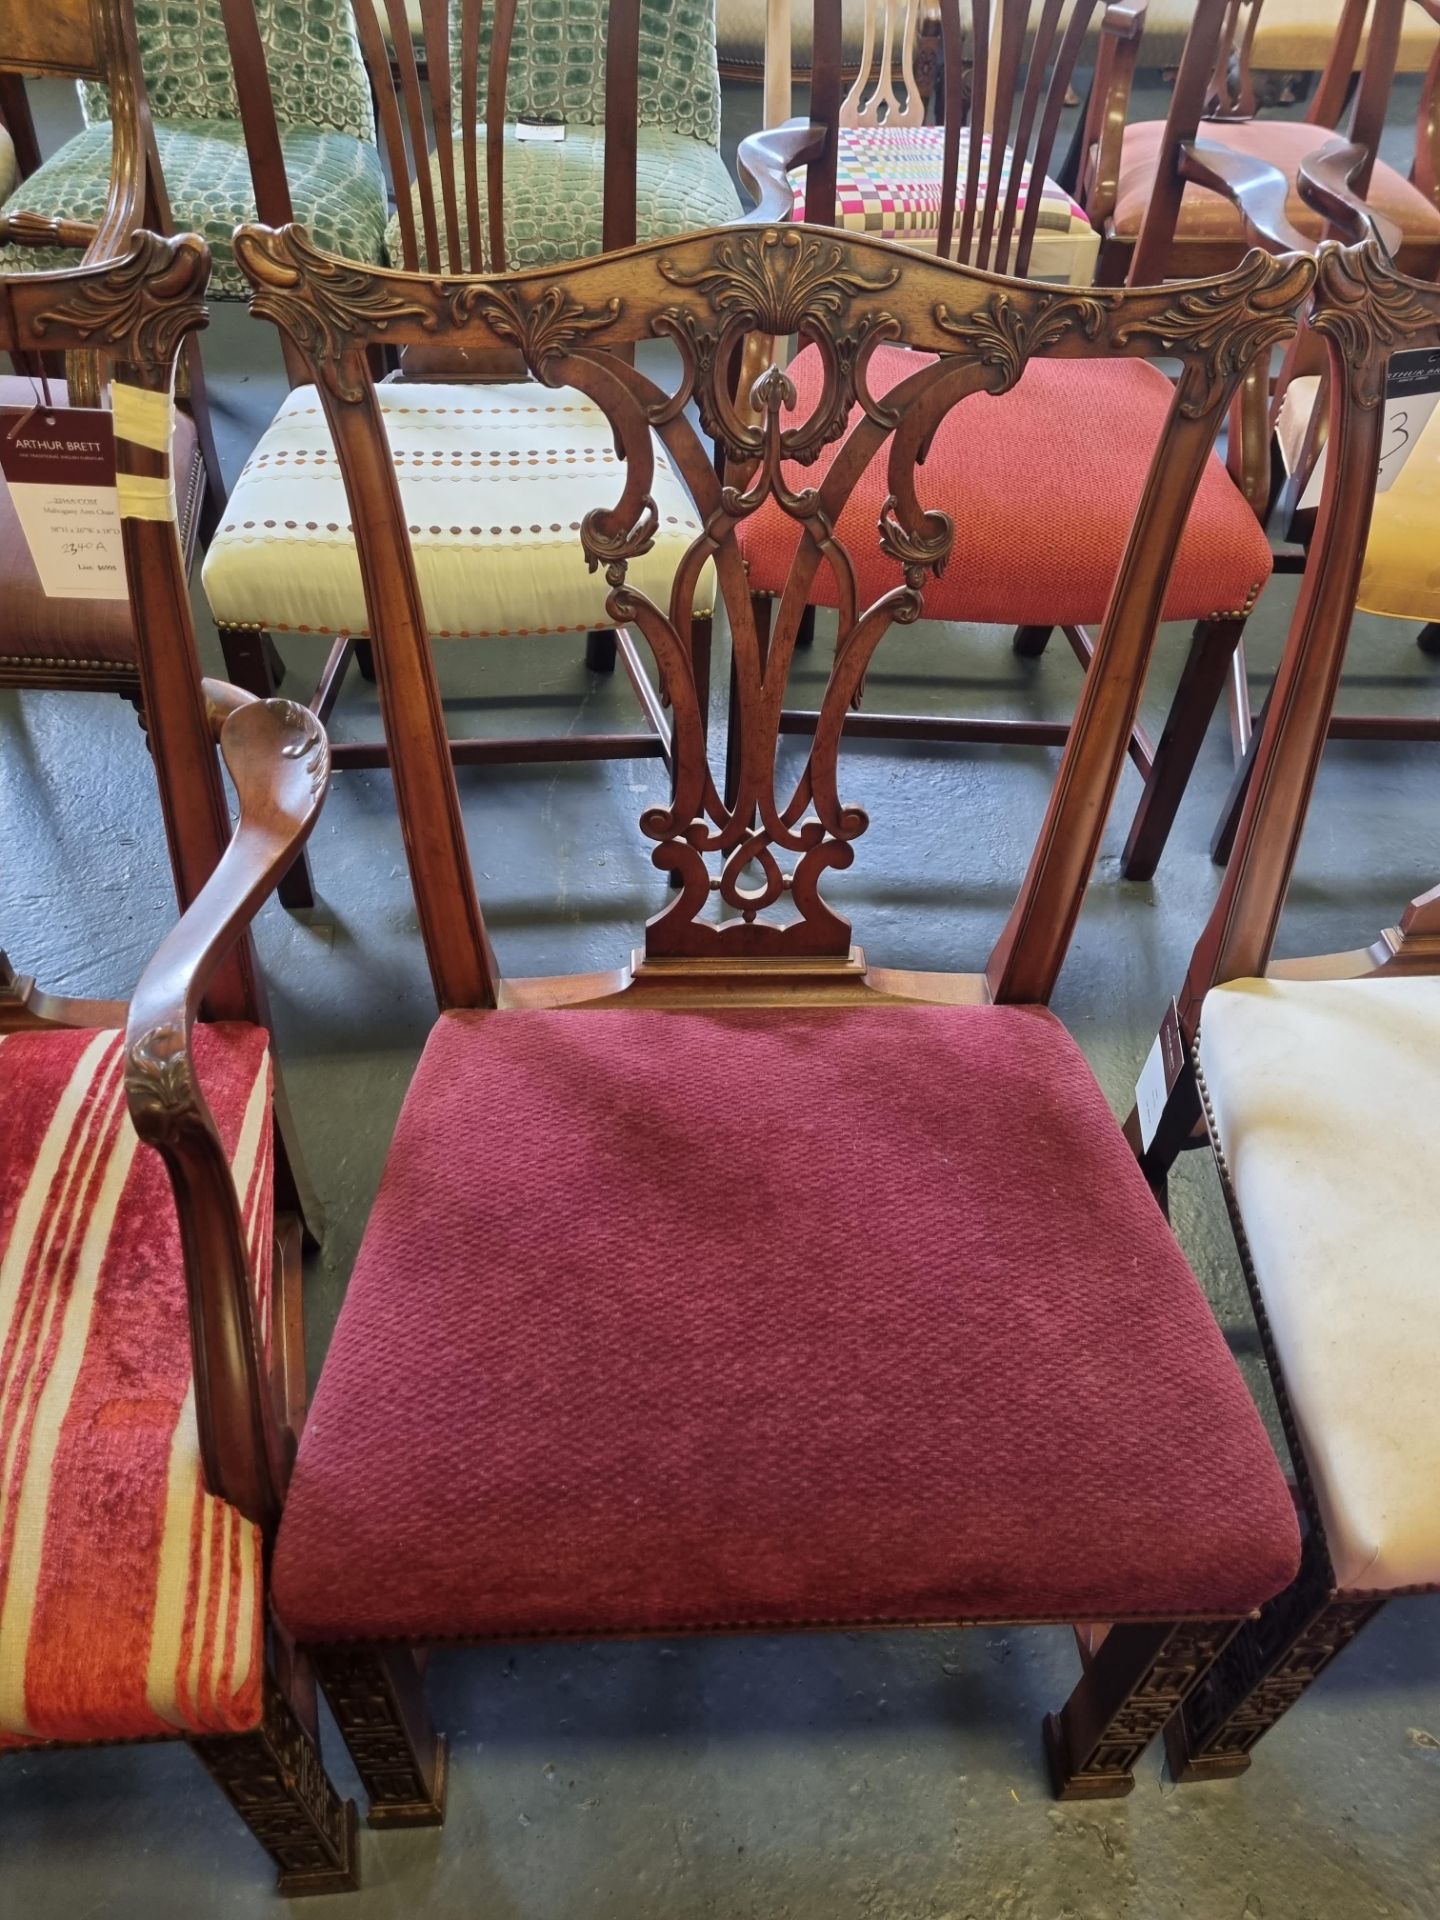 3 X Arthur Brett Mahogany Upholstered Dining Chairs With Subtly Carved Detail To Back And Front Legs - Image 3 of 5